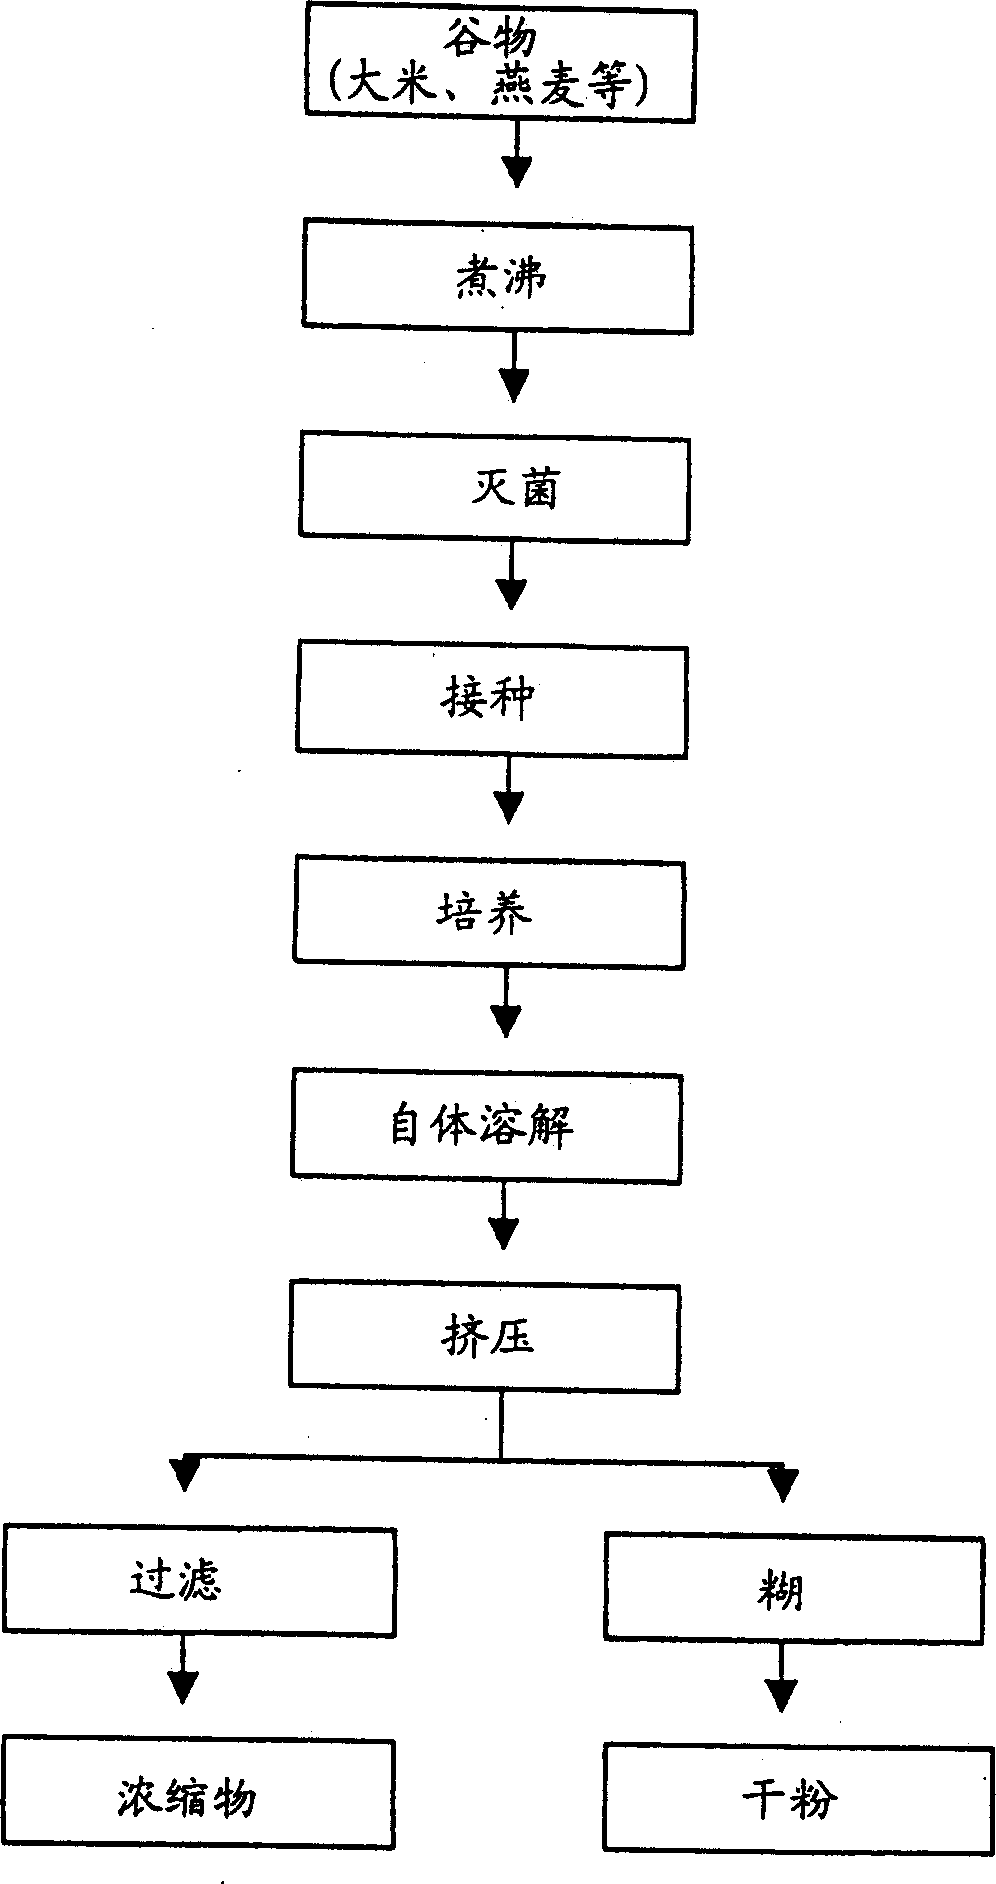 Method of culturing mycellium by using grain, its product use for culturing product